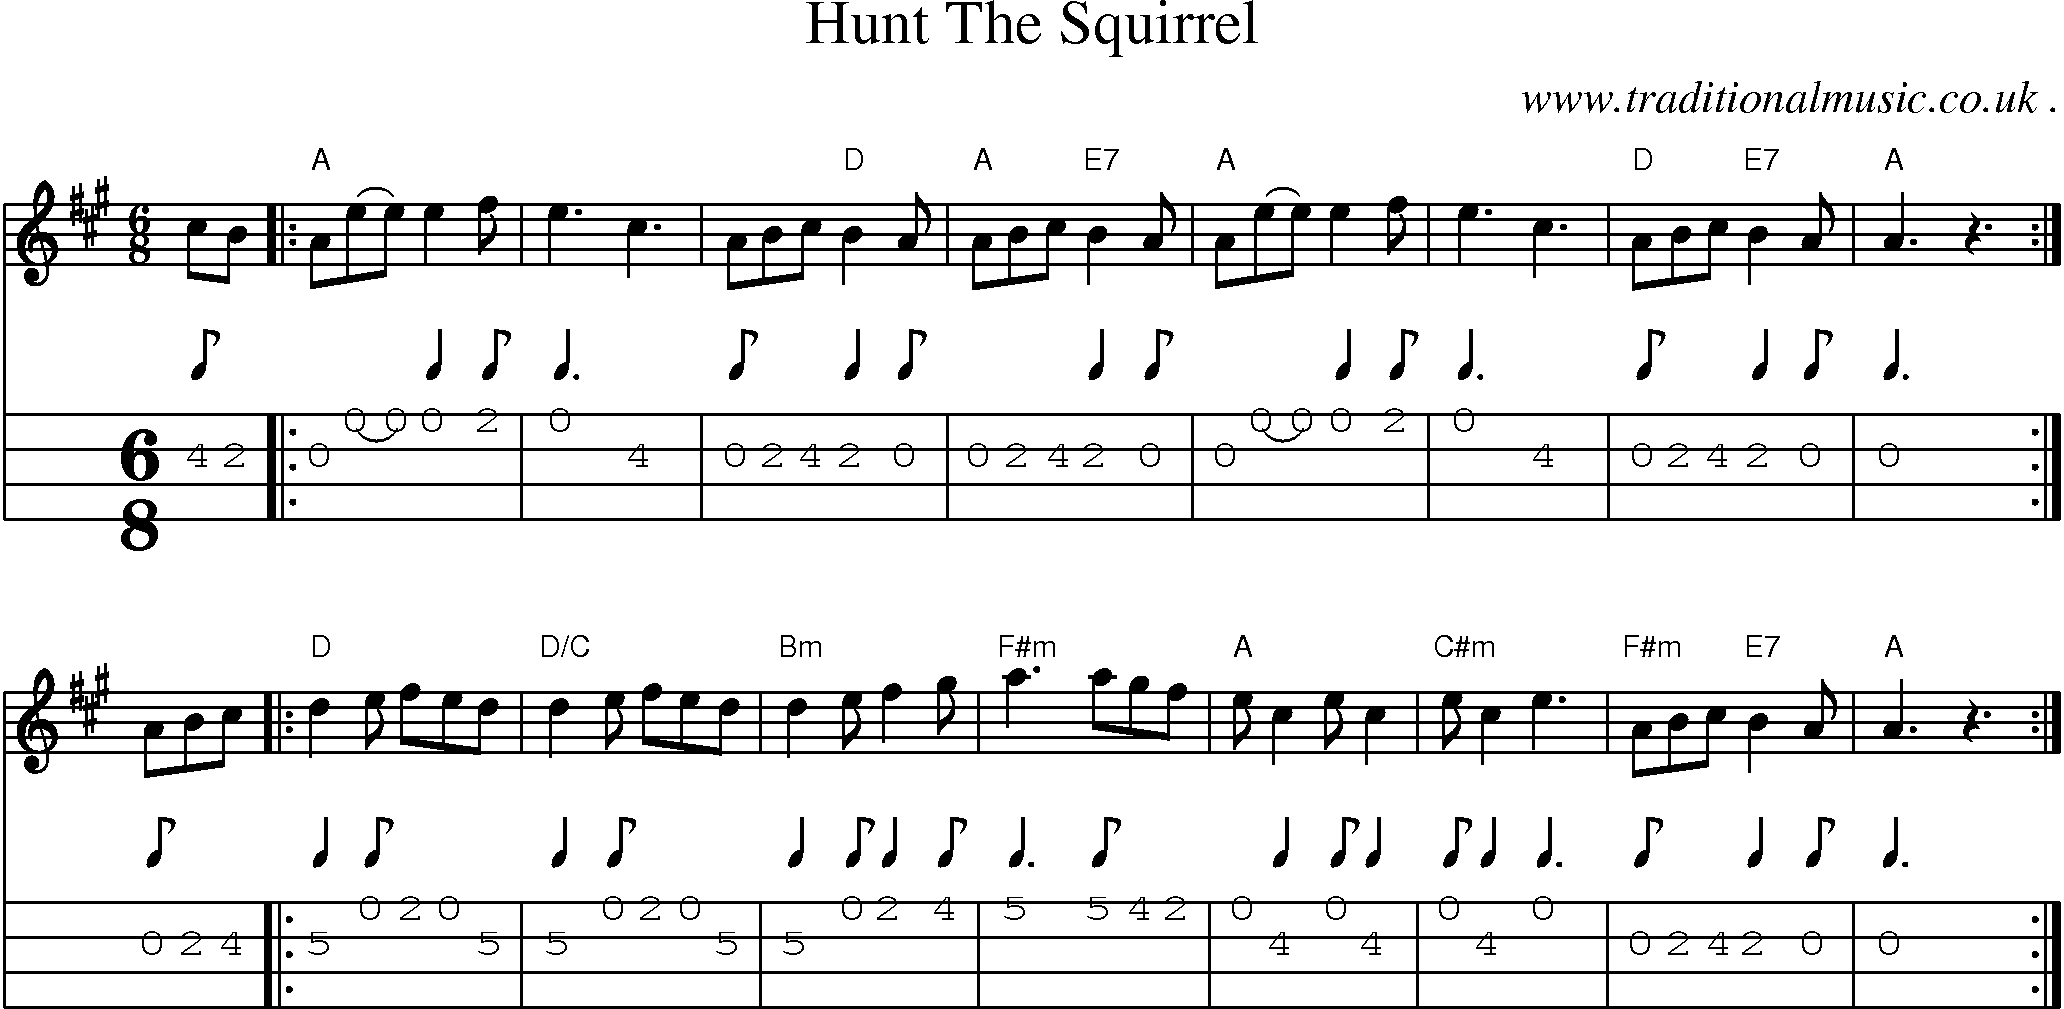 Sheet-music  score, Chords and Mandolin Tabs for Hunt The Squirrel